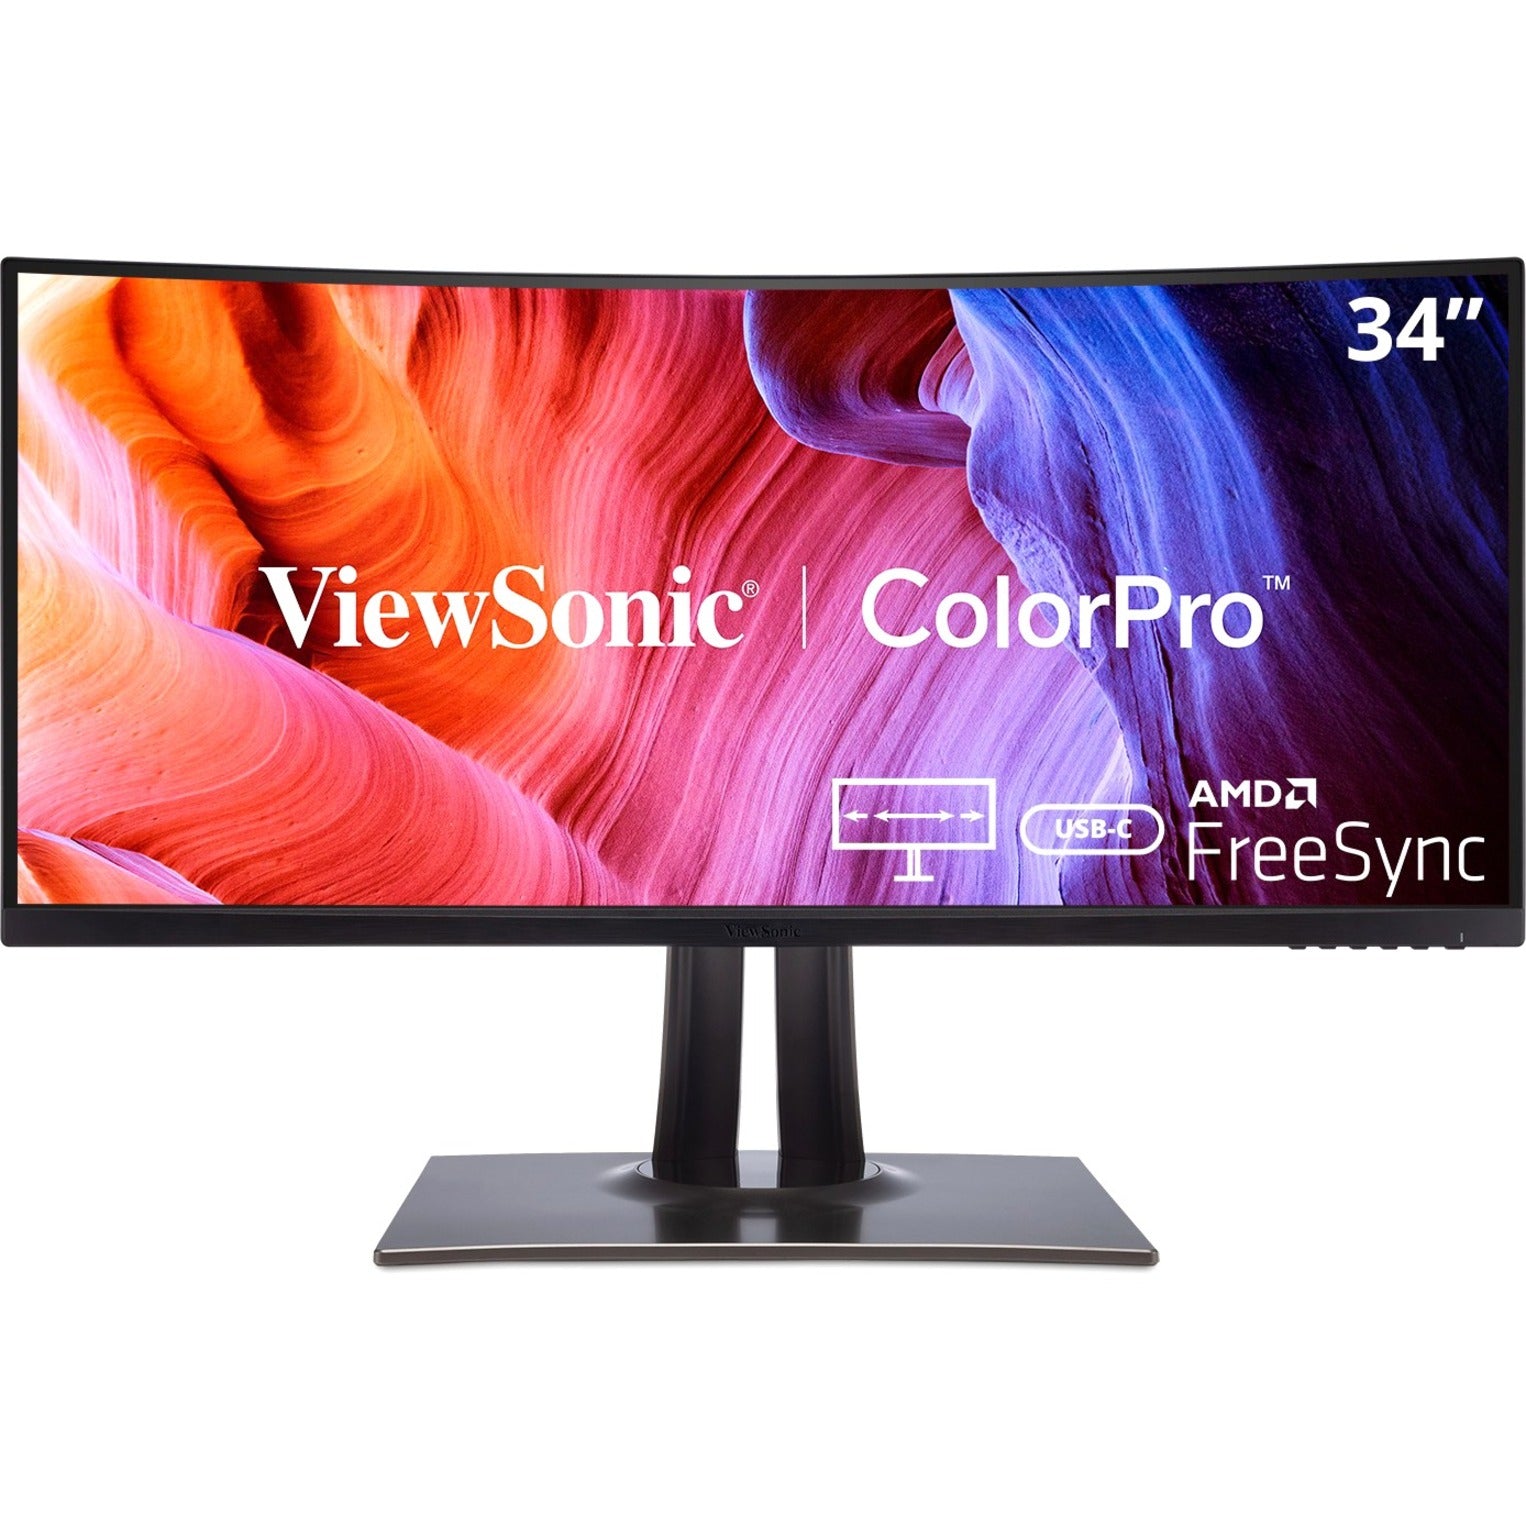 ViewSonic VP3481A 34" Curved Ultra-Wide ColorPro Monitor, 3440 x 1440 Resolution, USB C, 100Hz Freesync [Discontinued]